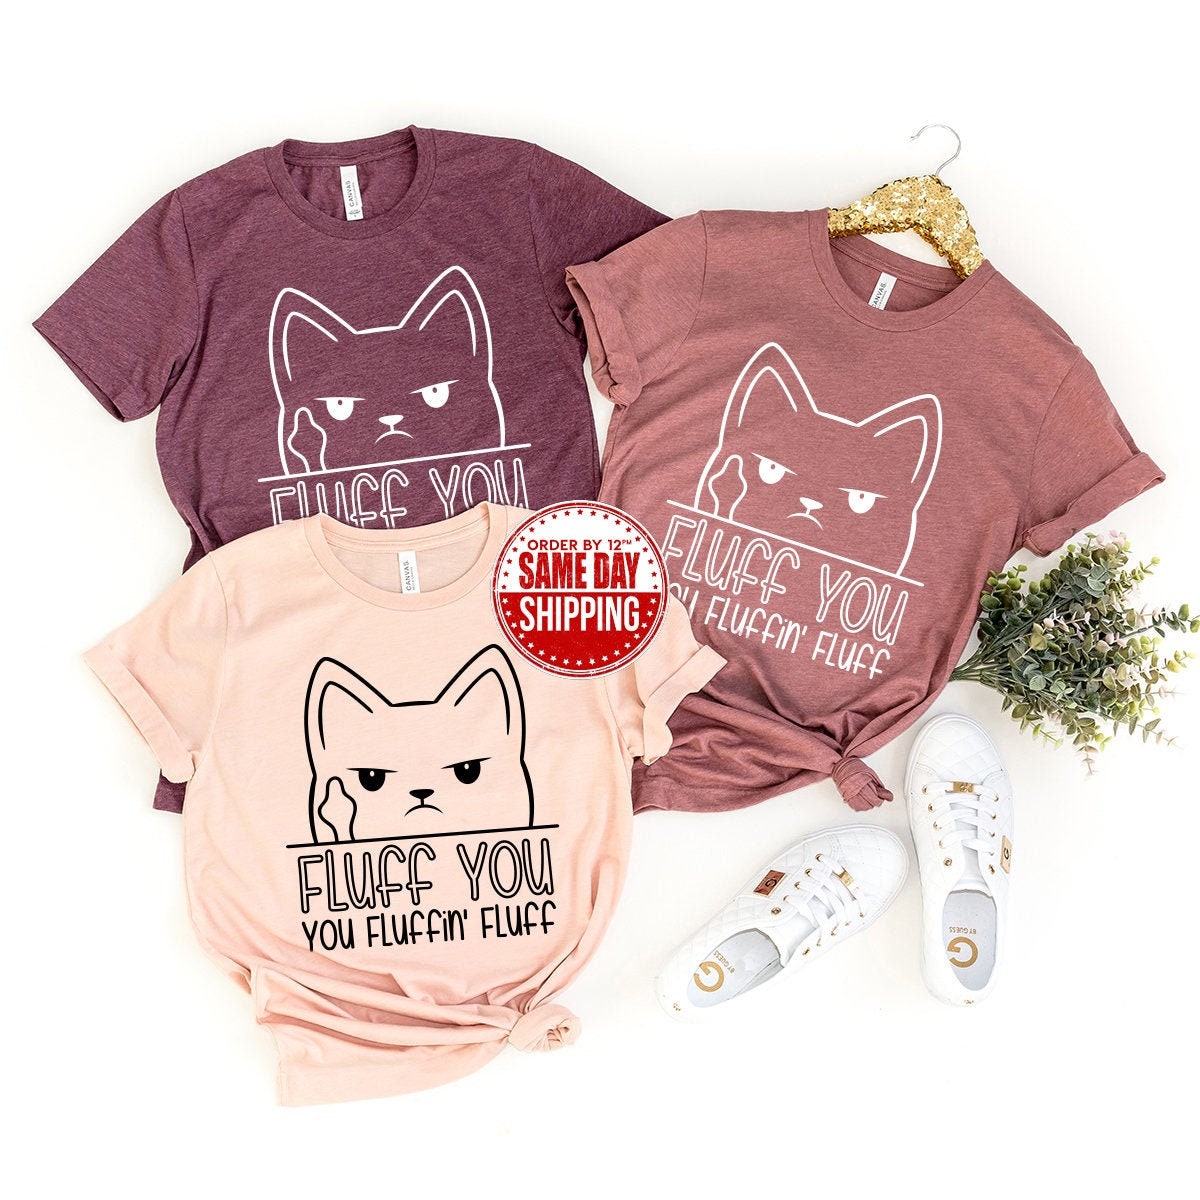 Funny Cat Shirt, Funny Saying TShirt, Funny Sarcastic T-Shirt, Fluff You Fluffin Fluff Shirt, Cool Women Gift, Humorous T Shirt, Kitty Tee - Fastdeliverytees.com